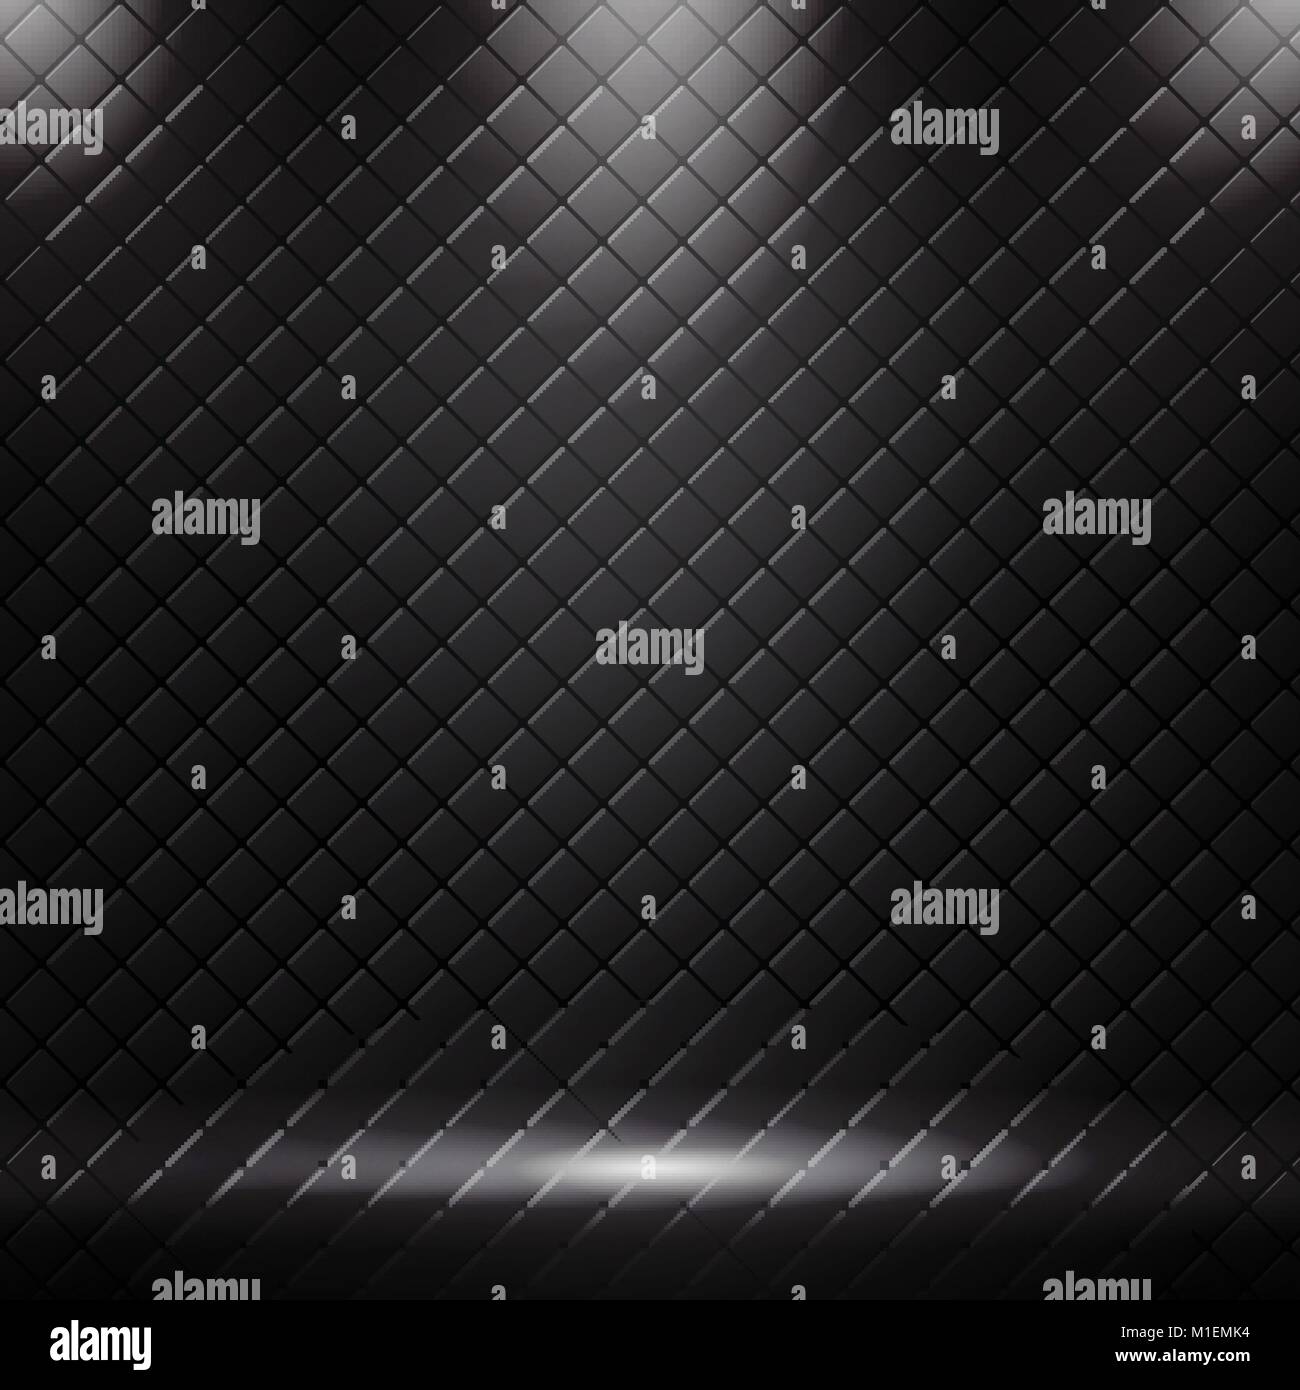 Studio luxury sofa background and texture with spotlight. Black square pattern with lighting. vector illustration Stock Vector